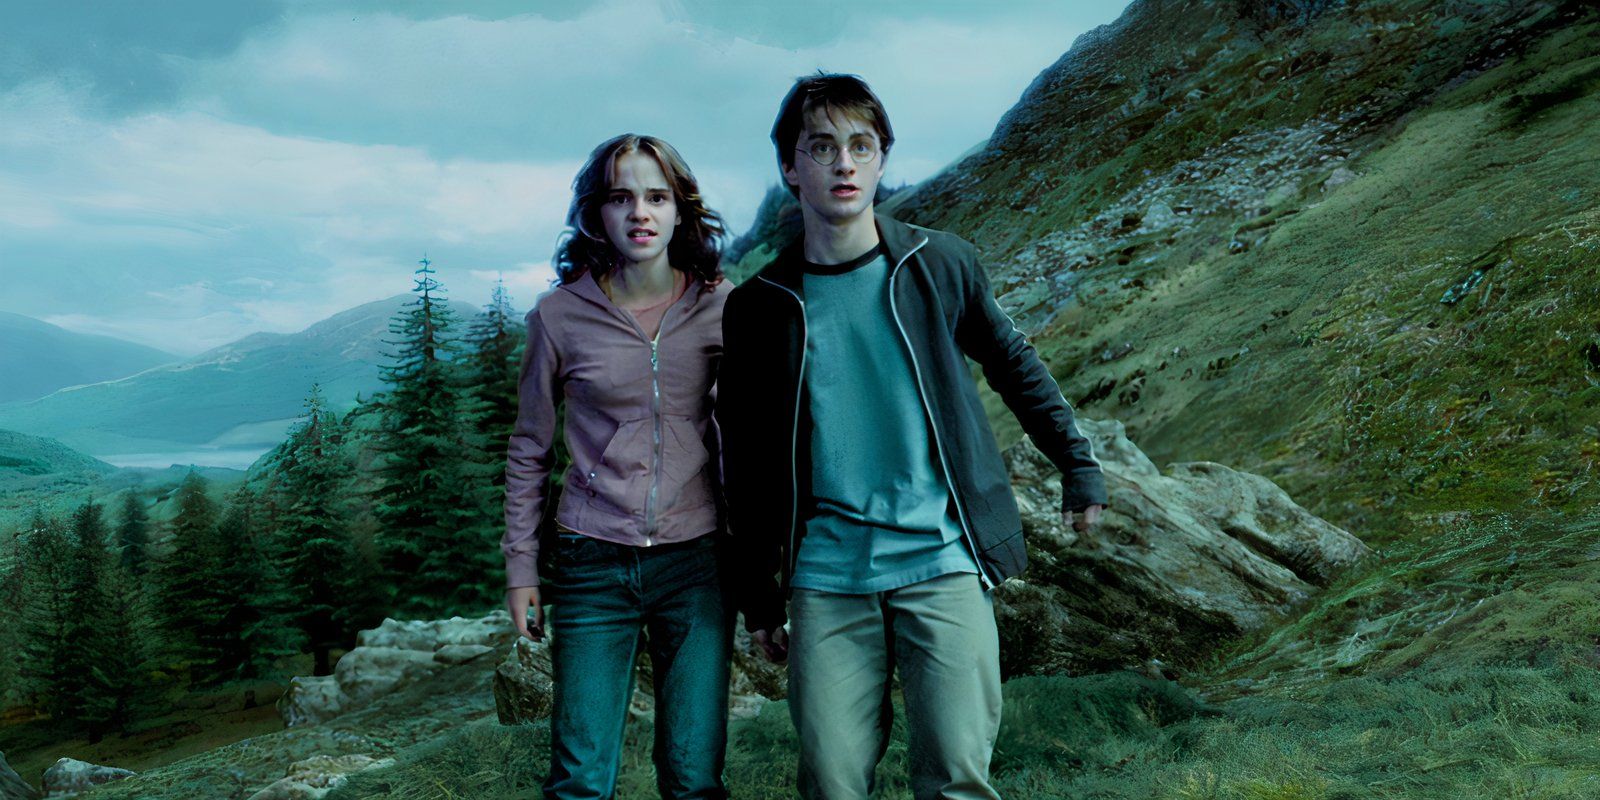 Why Prisoner Of Azkaban Changed How Harry Potter Movies Filmed Hogwarts Explained By Director